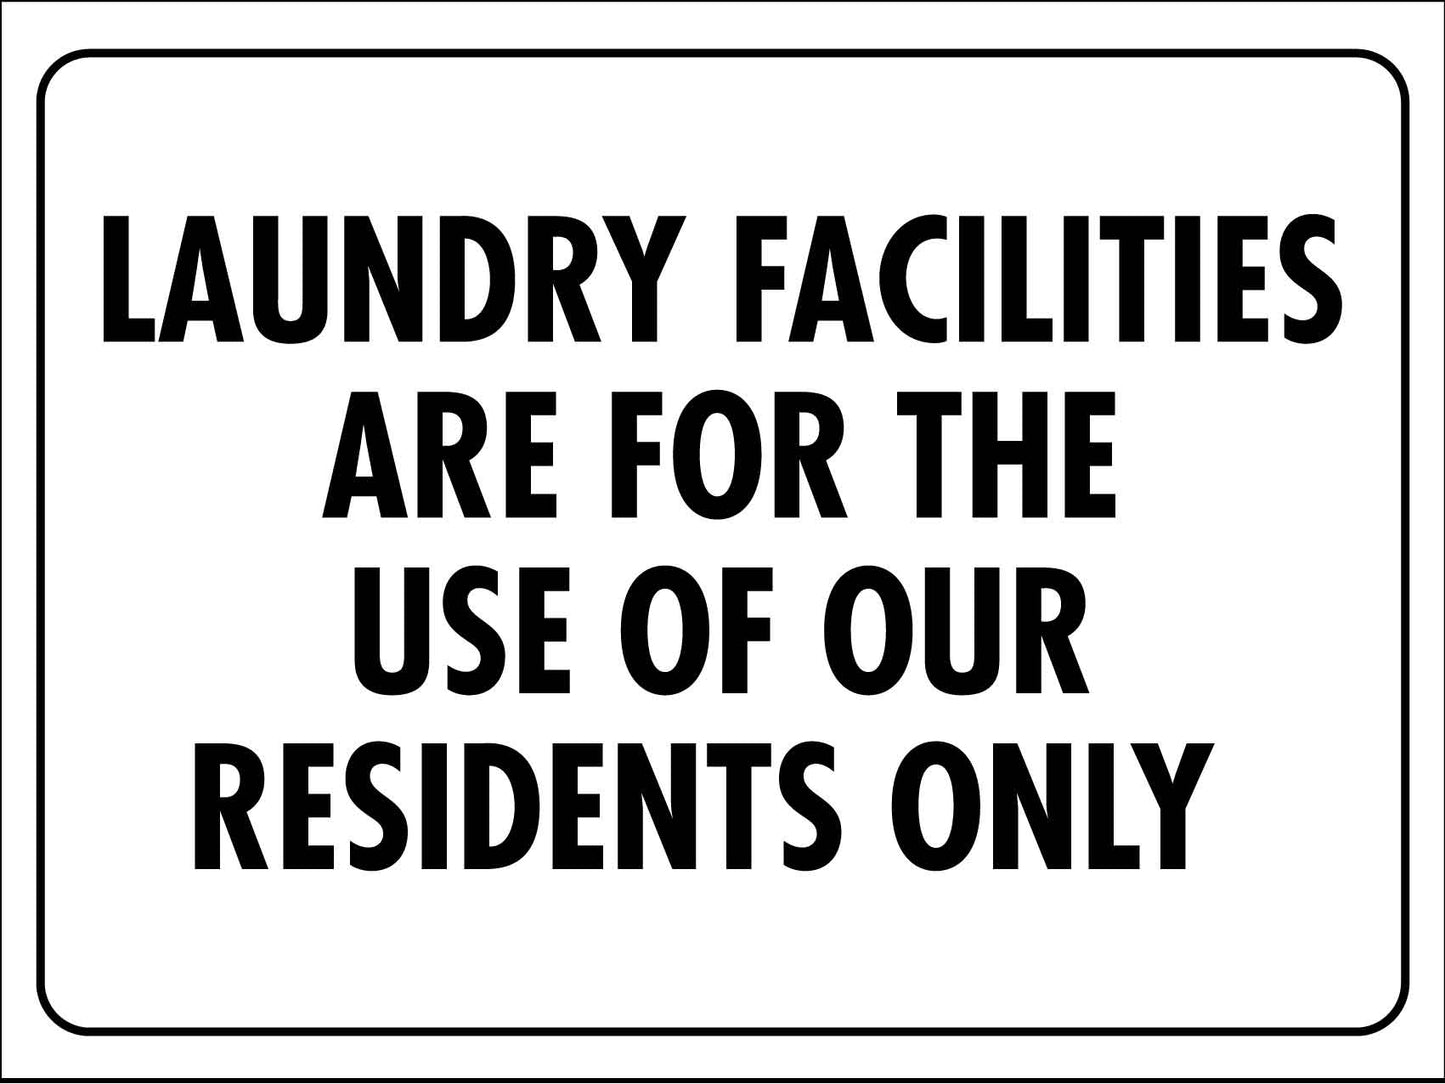 Laundry Facilities Are For The Use Of Our Residents Only Sign